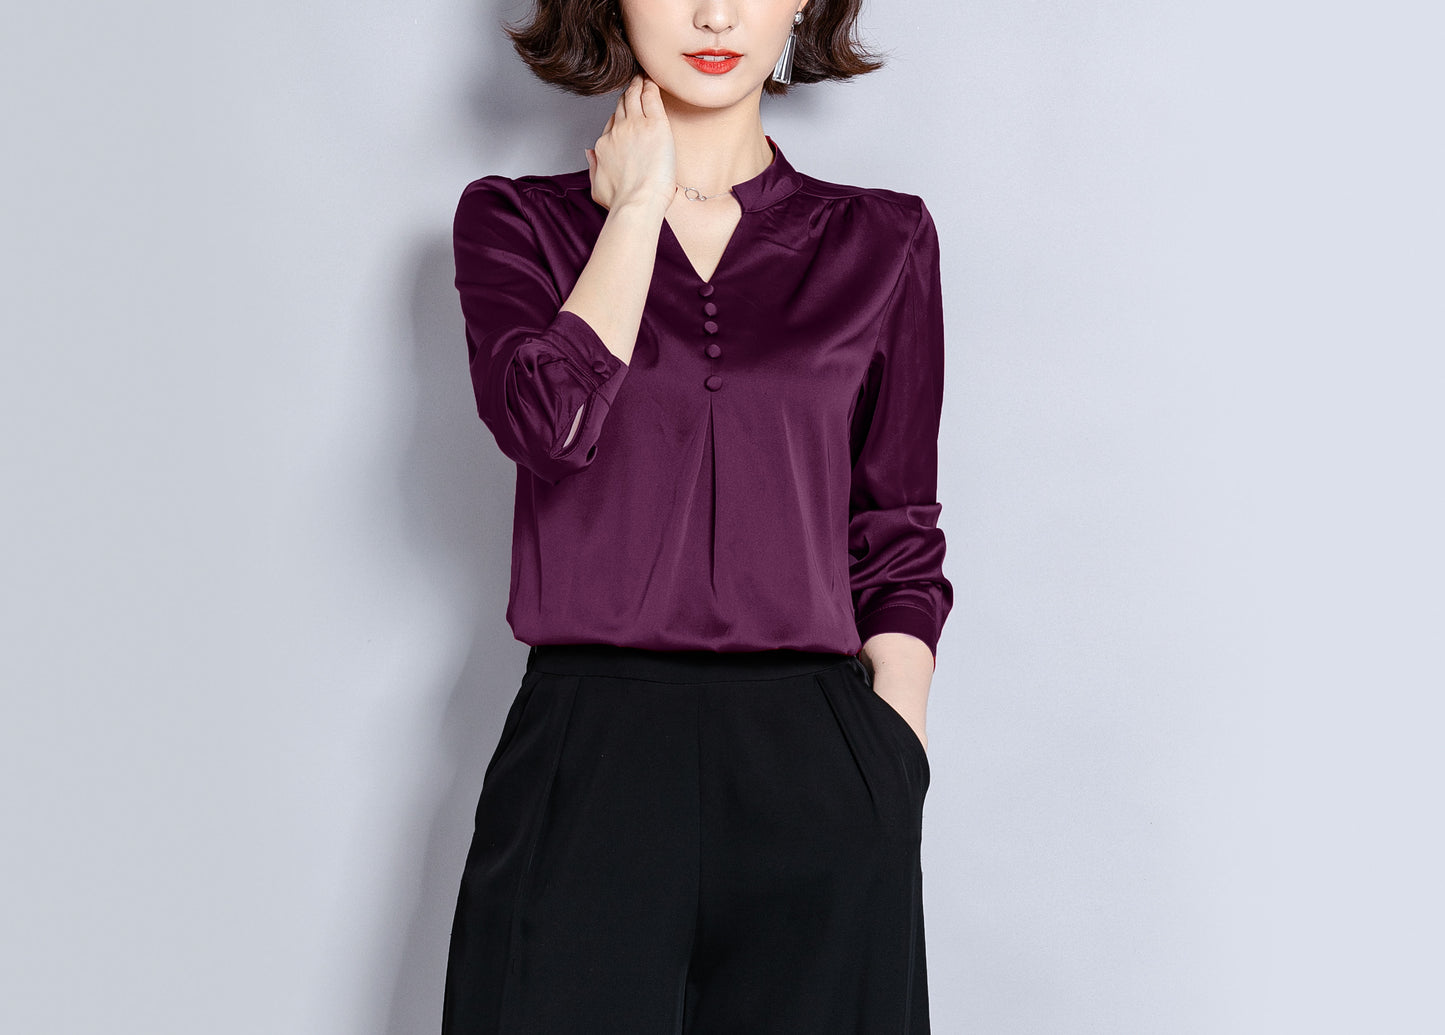 Solid Purple V-neck Long Sleeves Stain Shirt Blouse